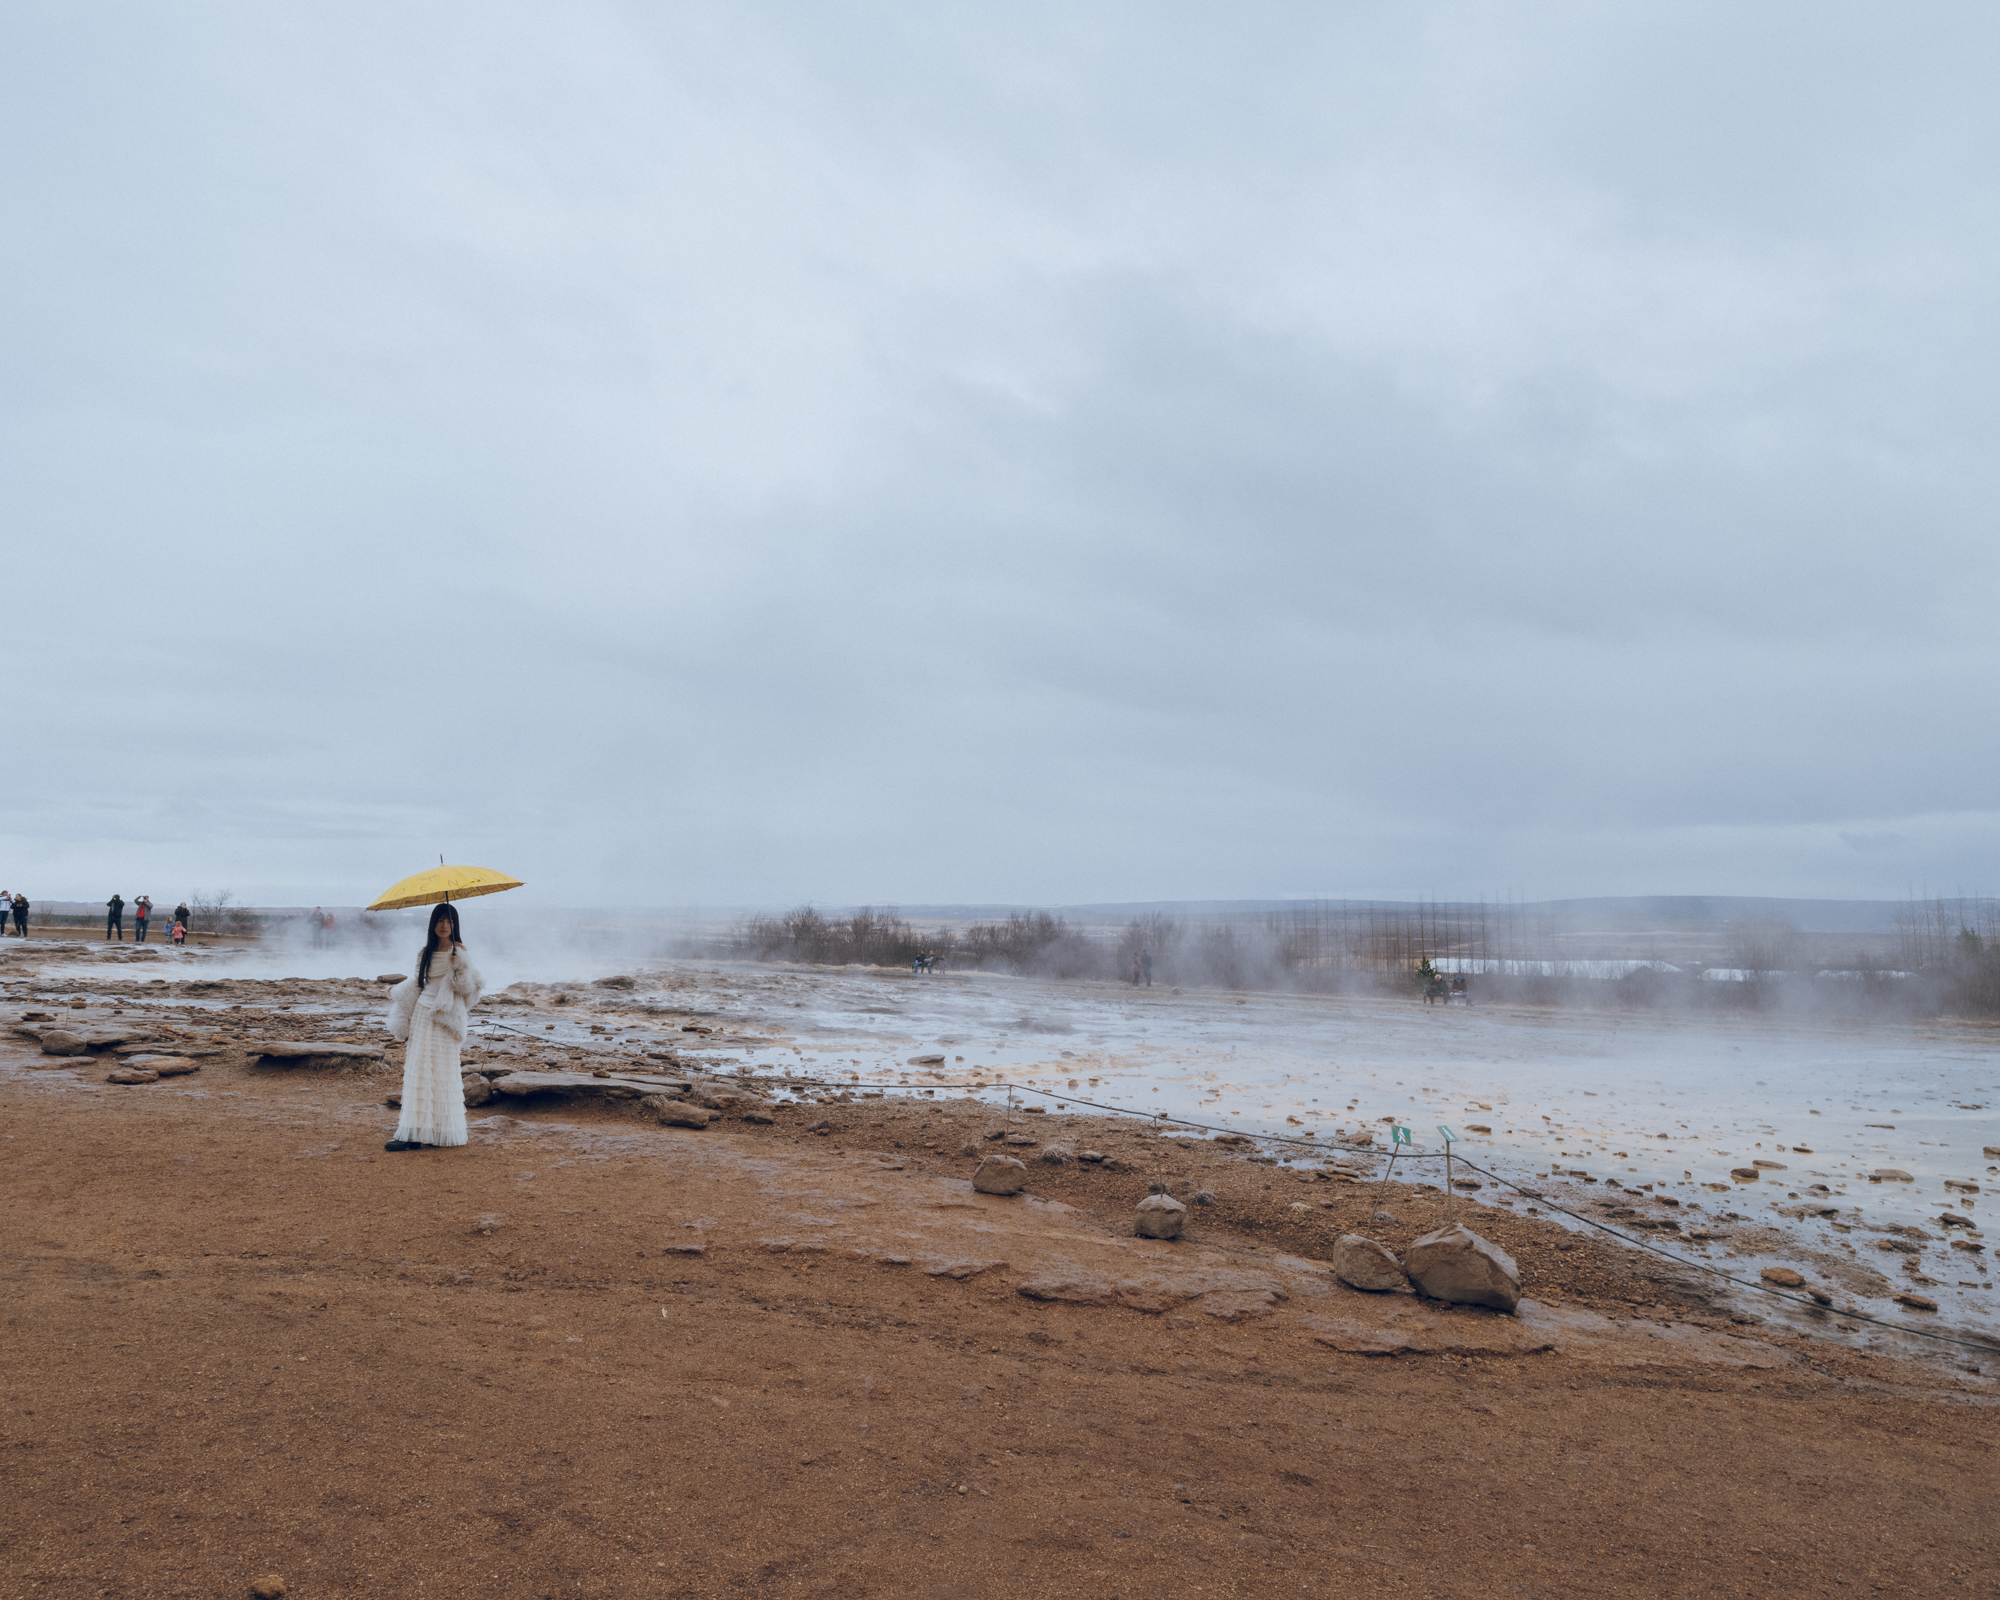 Girl with Umbrella at Geysir Strokkur Blesi, Haukadalur Valley, Iceland: A playful moment amidst geothermal wonders